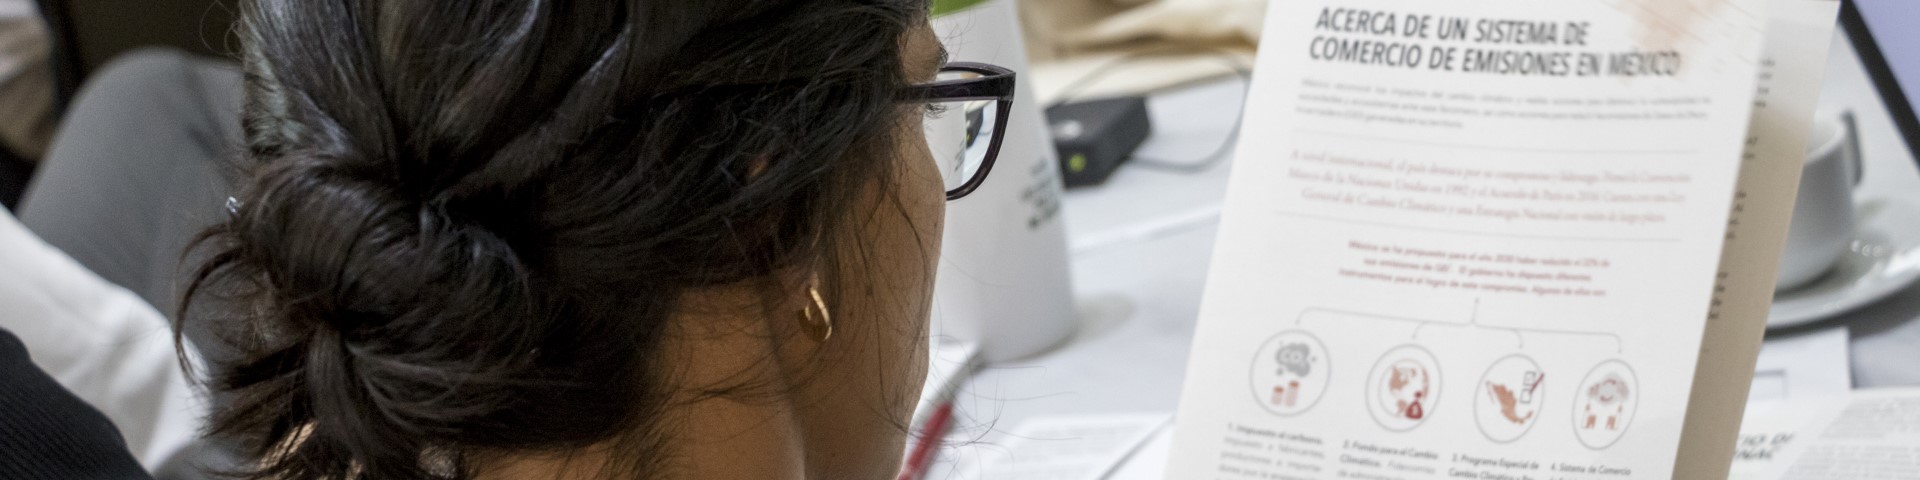 A woman is looking at a document (in Spanish) on the emissions trading system in Mexico.